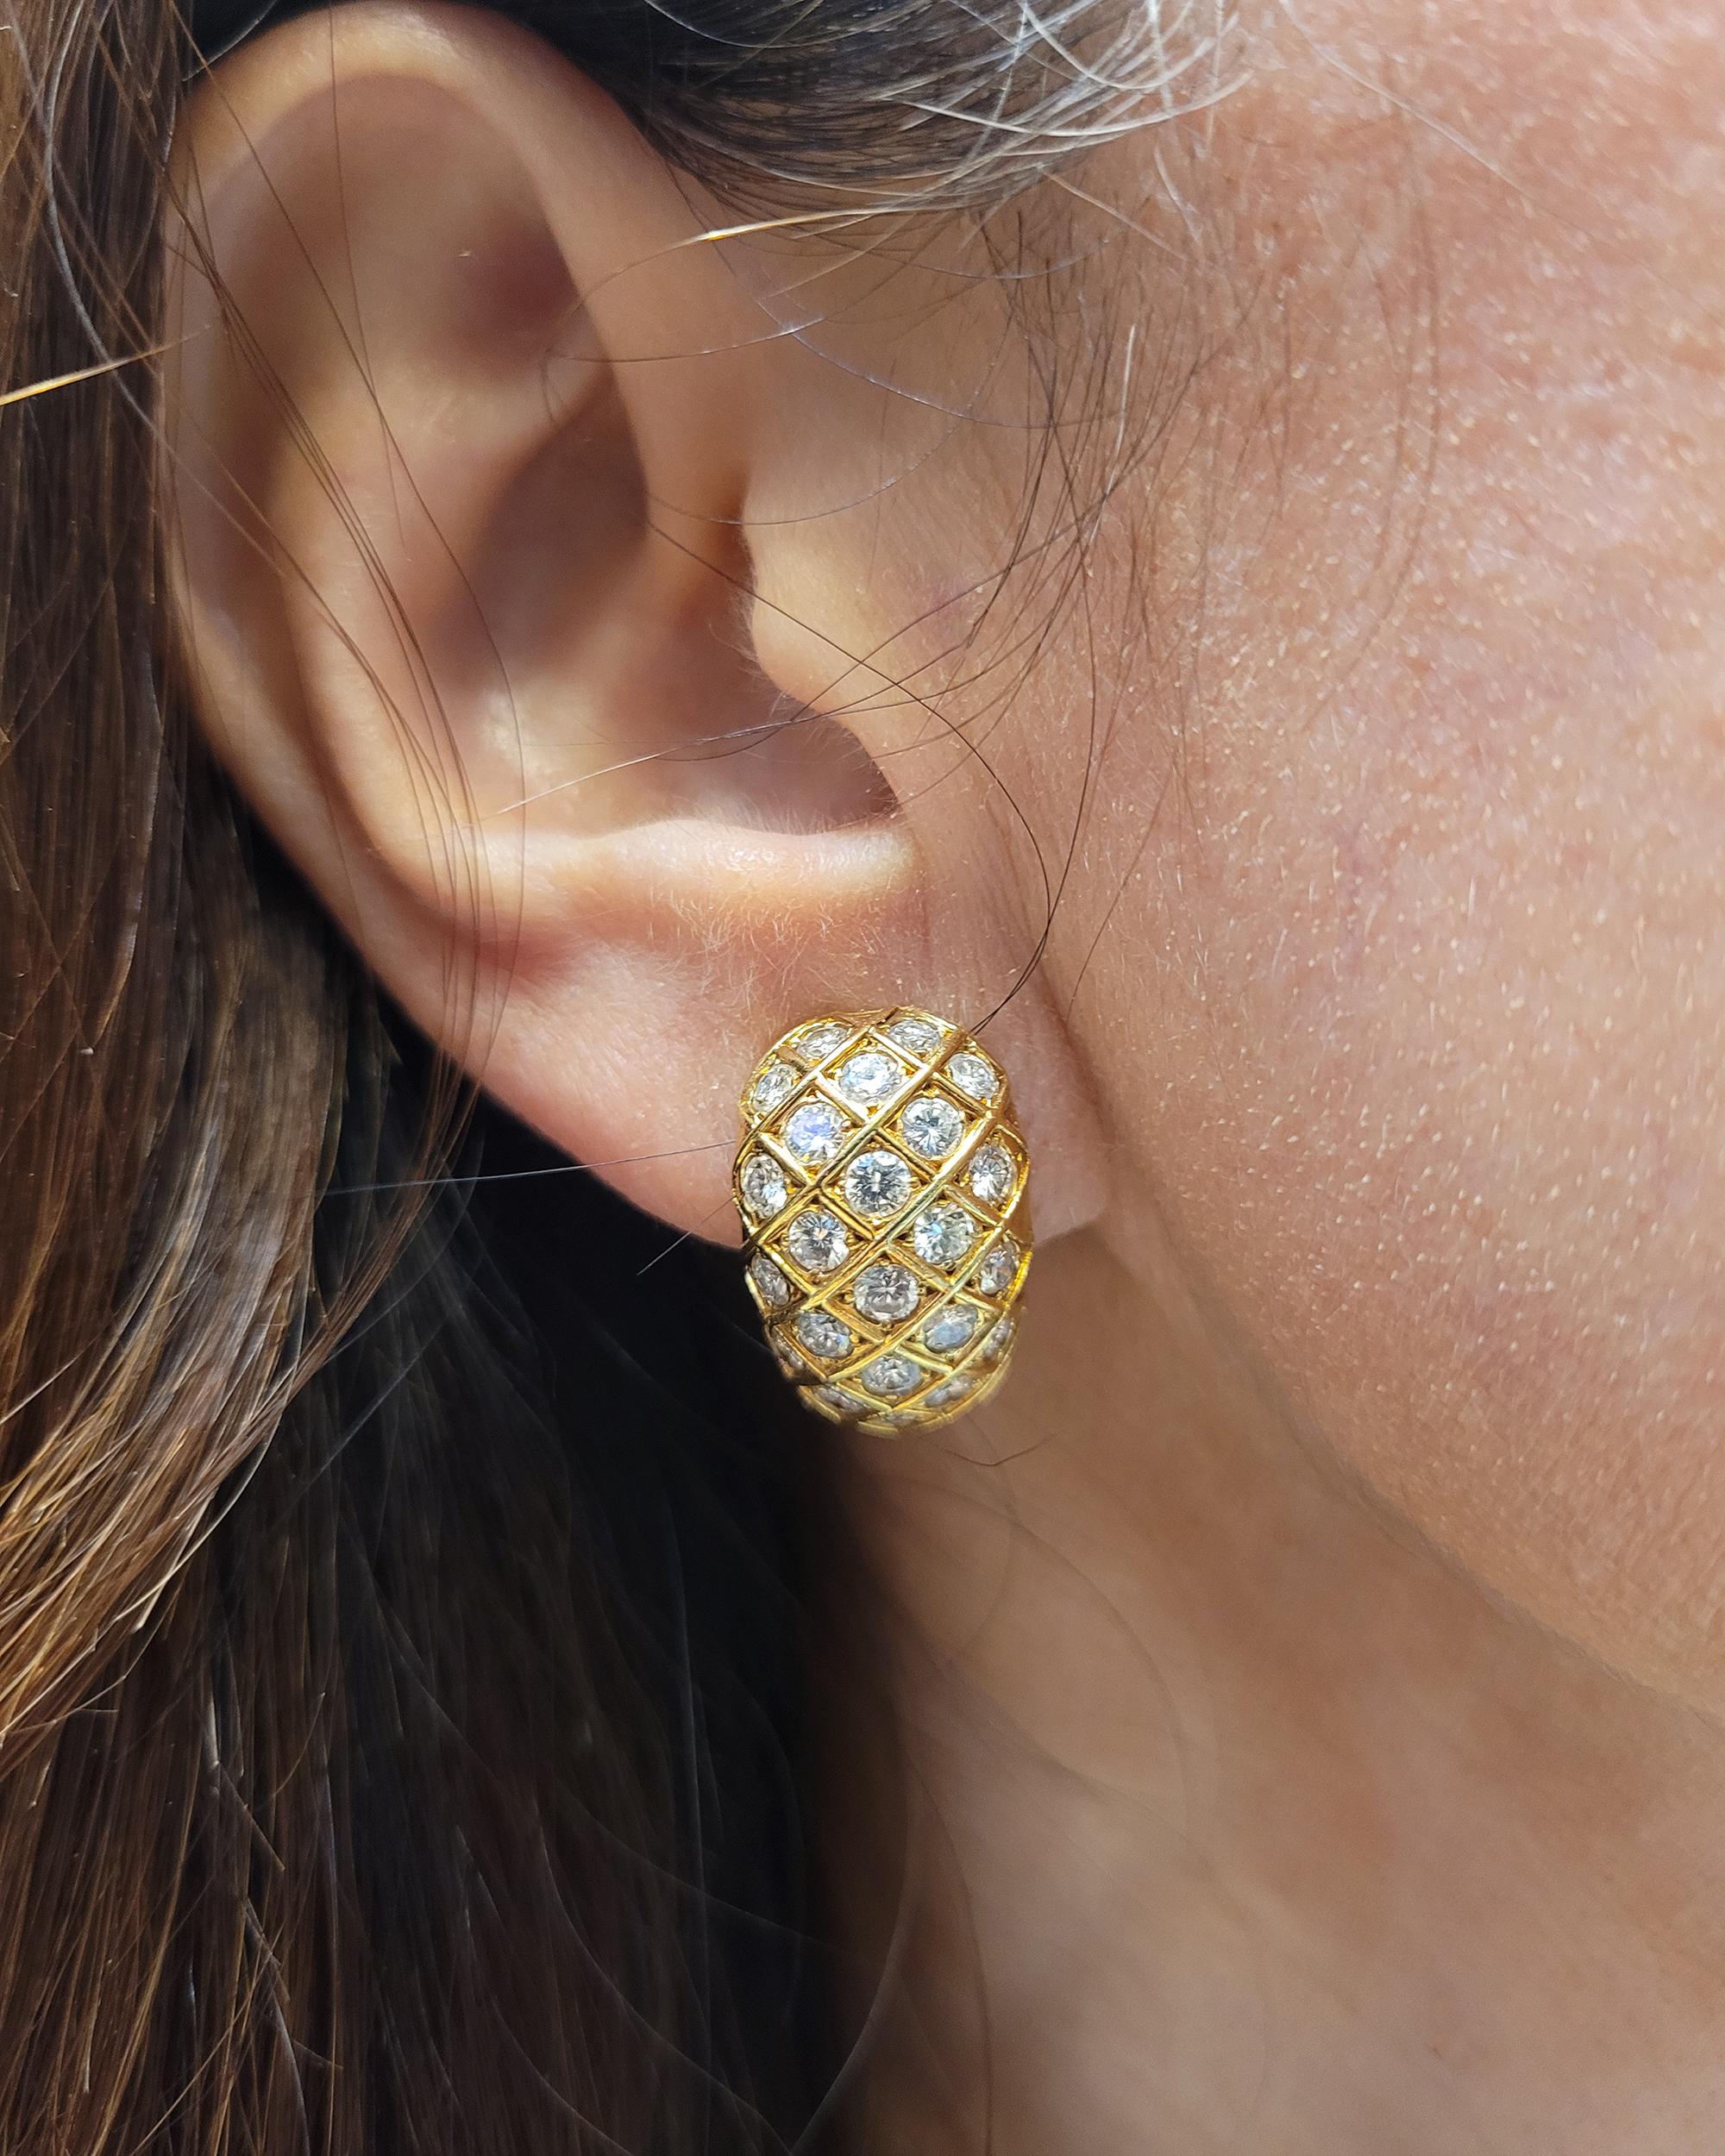 This extraordinary pair of Van Cleef & Arpels Diamond 'Huggie' Earrings, made in France in the 21th century, circa 2000s, feature dazzling diamonds within a striking geometric and graphic design. Crafted in 18K yellow gold, the symmetrical pair of